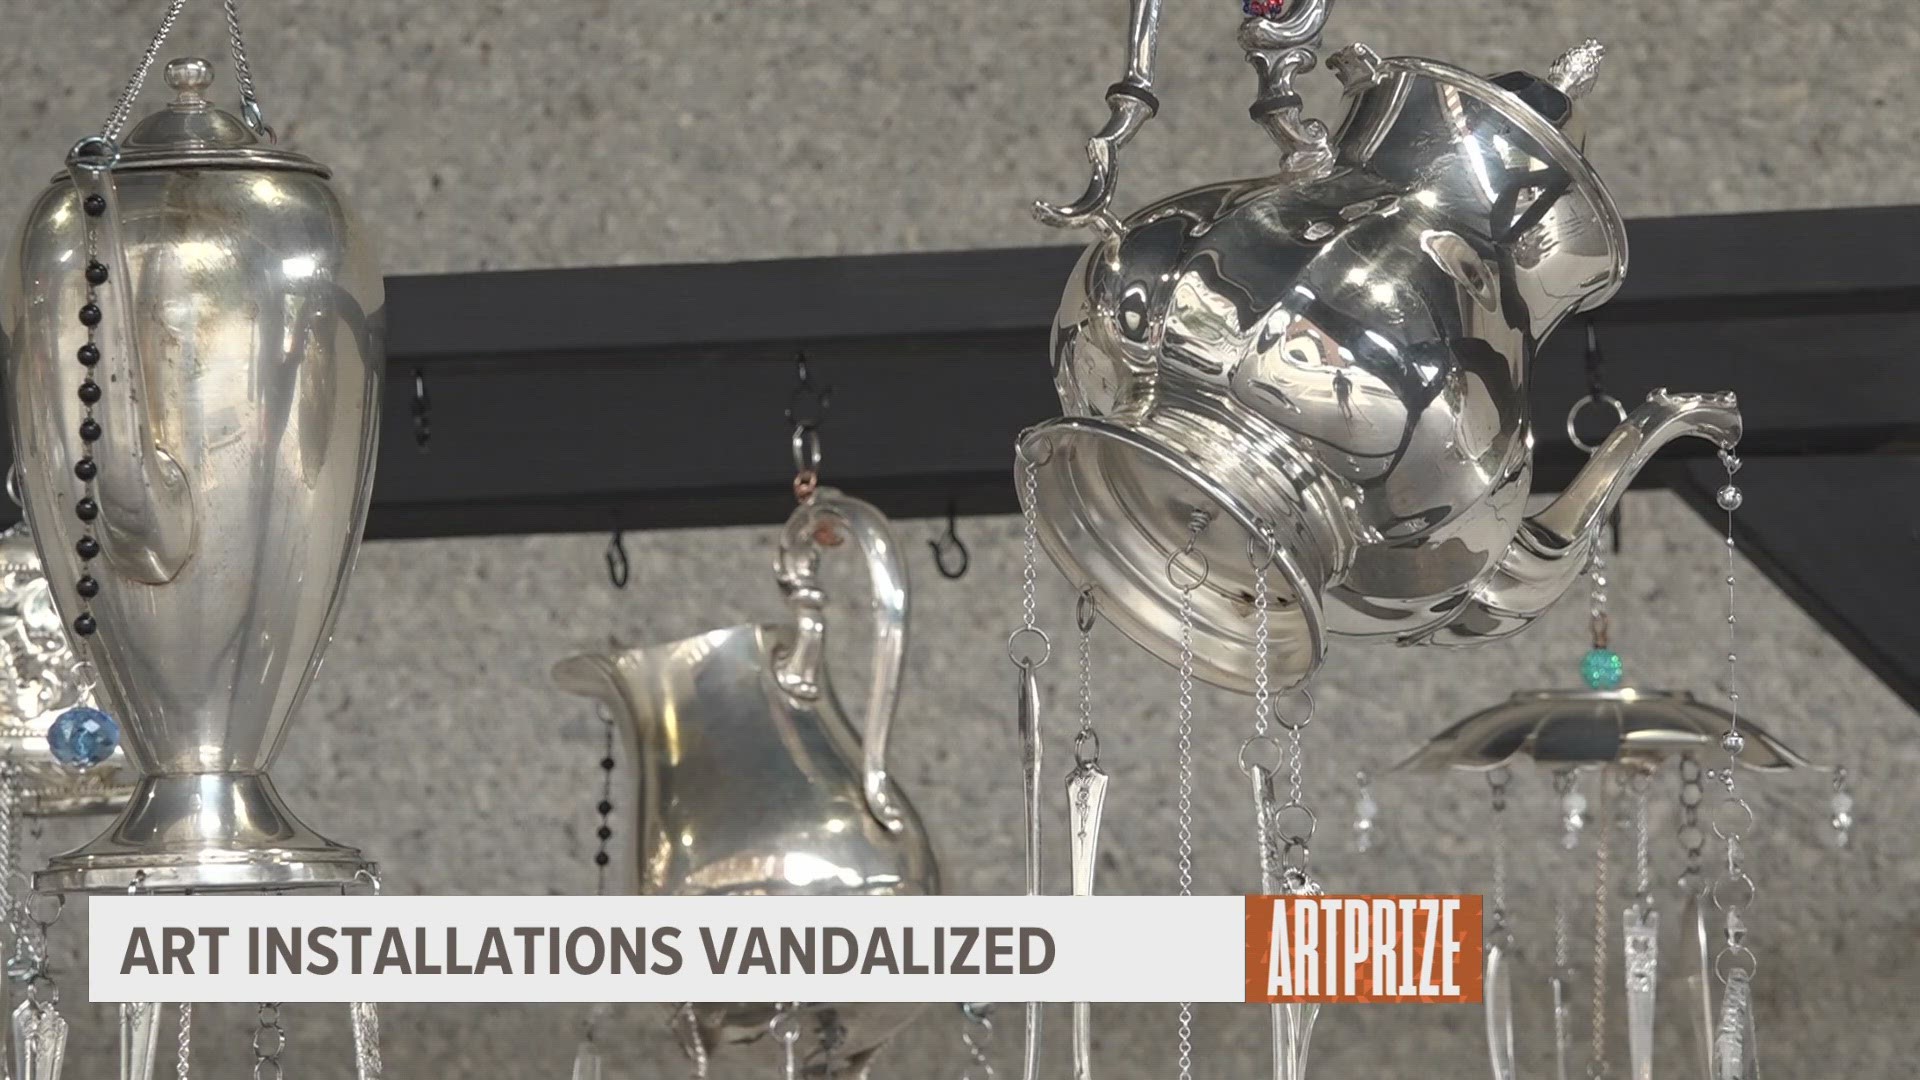 Multiple ArtPrize installations were vandalized over the weekend. Two of the installations had portions of the art stolen as well.